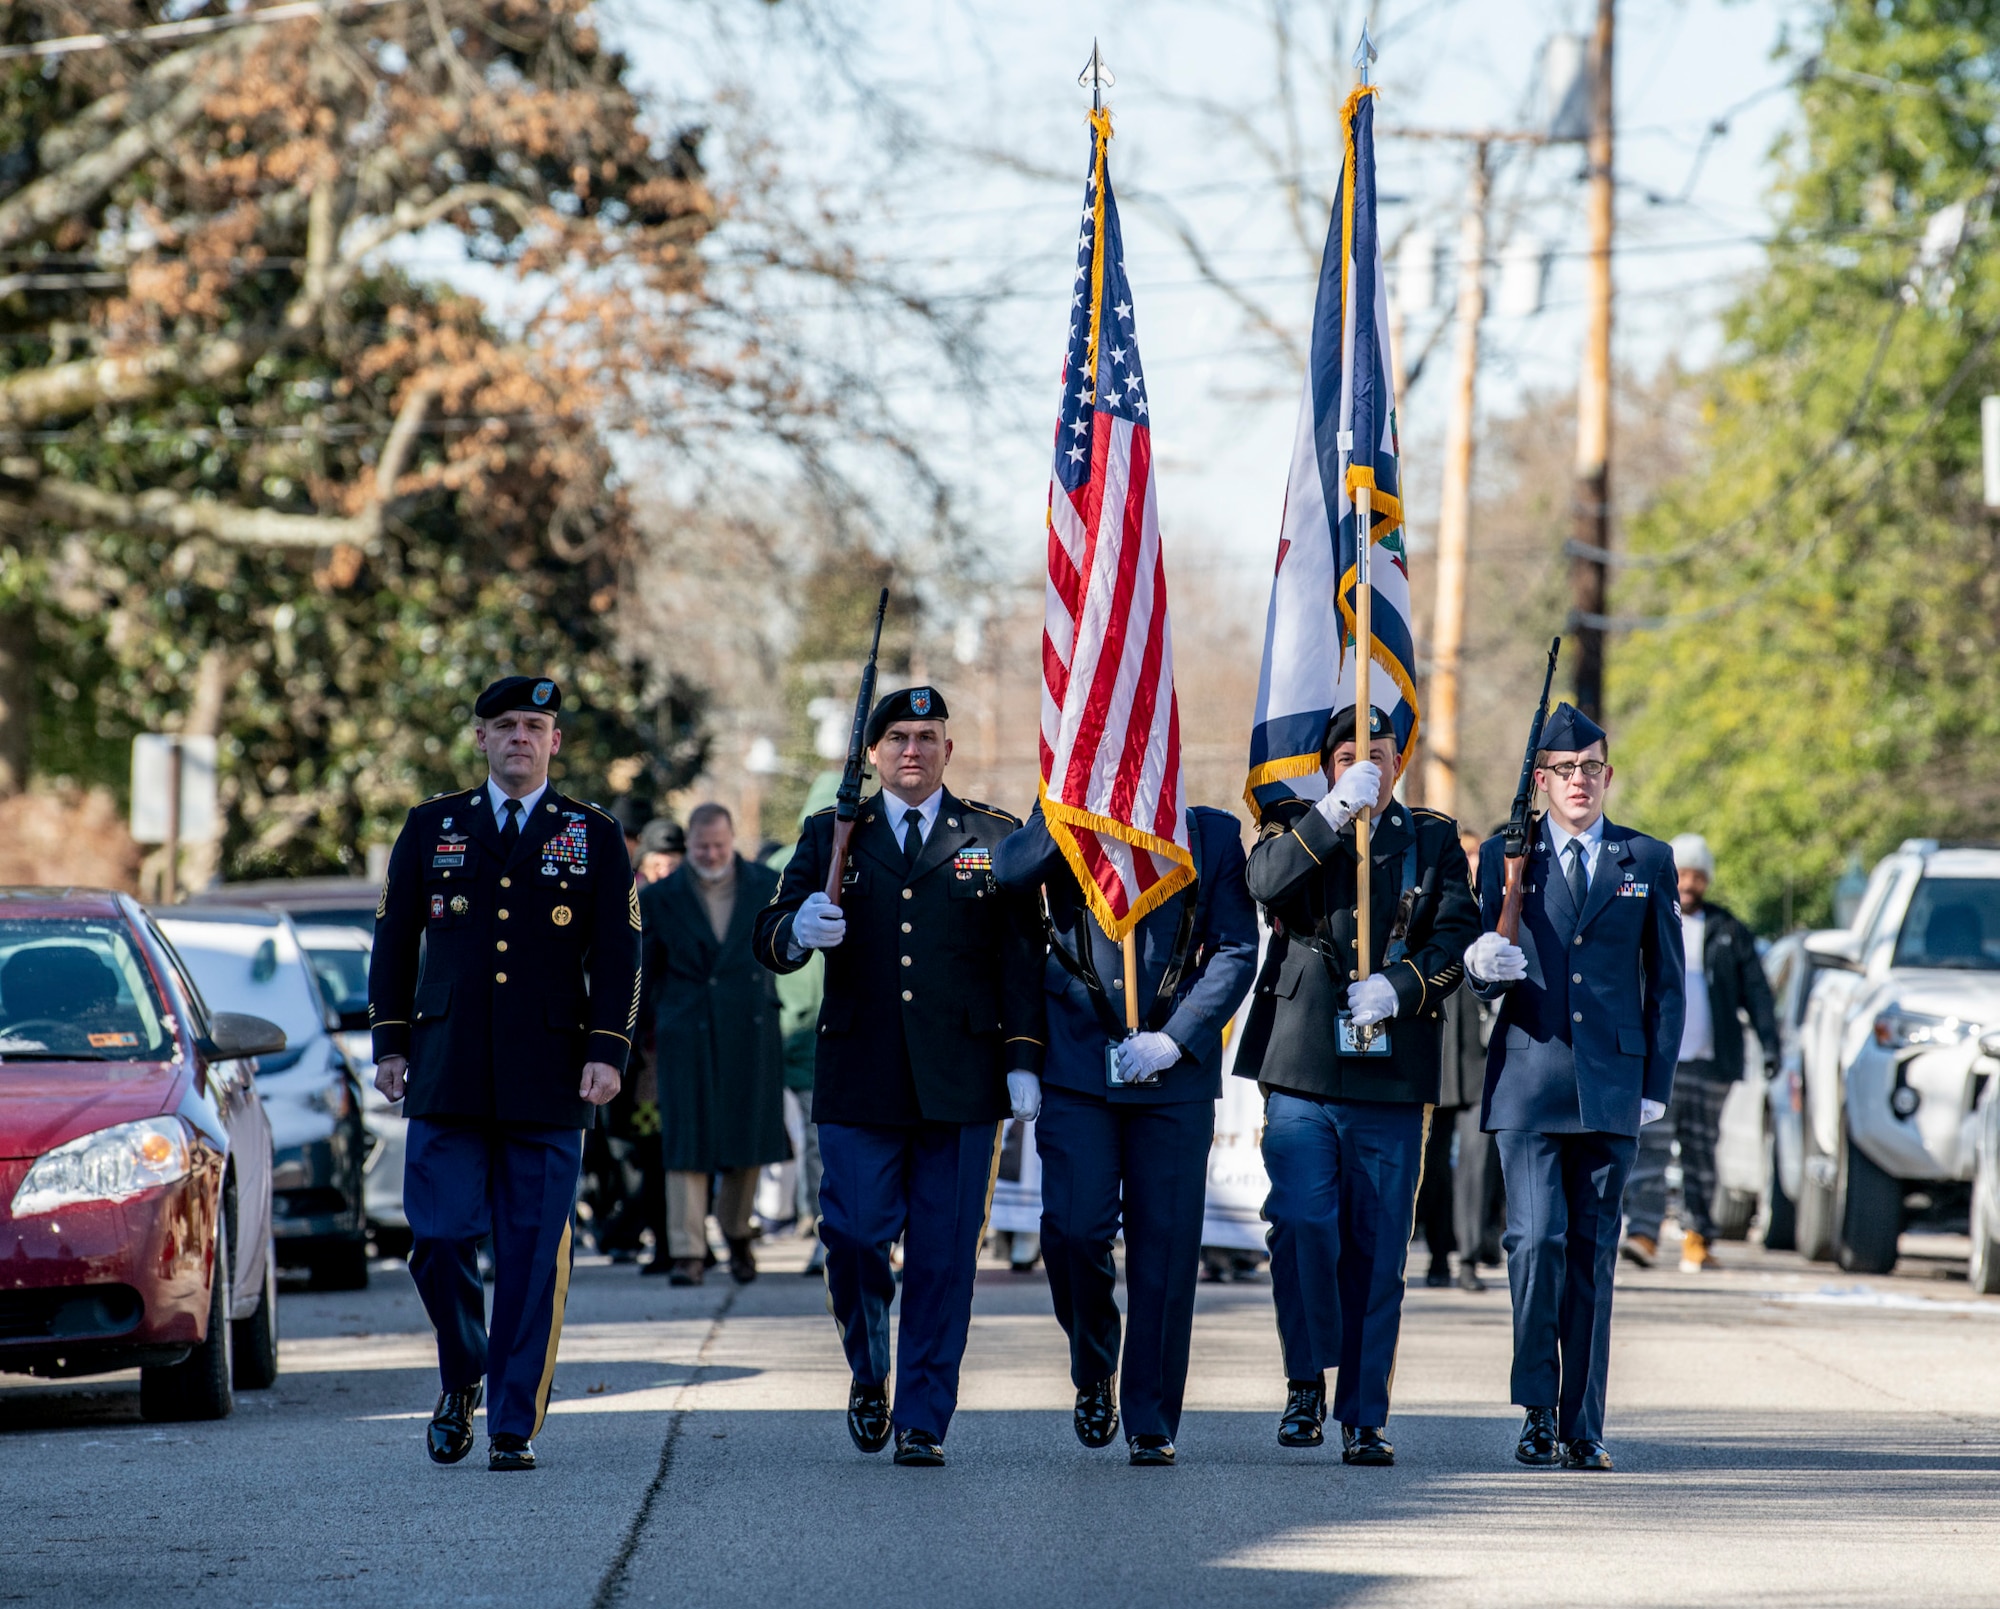 West Virginia National Guard Senior Enlisted Leader, Command Sgt. Maj. Phillip Cantrell, marches beside the joint color guard Jan. 21, 2019, during the Dr. Martin Luther King, Jr., memorial march in Charleston, W.Va. Cantrell will formally assume the responsibilities as State Senior Enlisted Leader on Feb. 2, 2019, during a change of responsibility ceremony at the West Virginia National Guard Joint Forces Headquarters in Charleston. (U.S. Army National Guard photo by Bo Wriston)